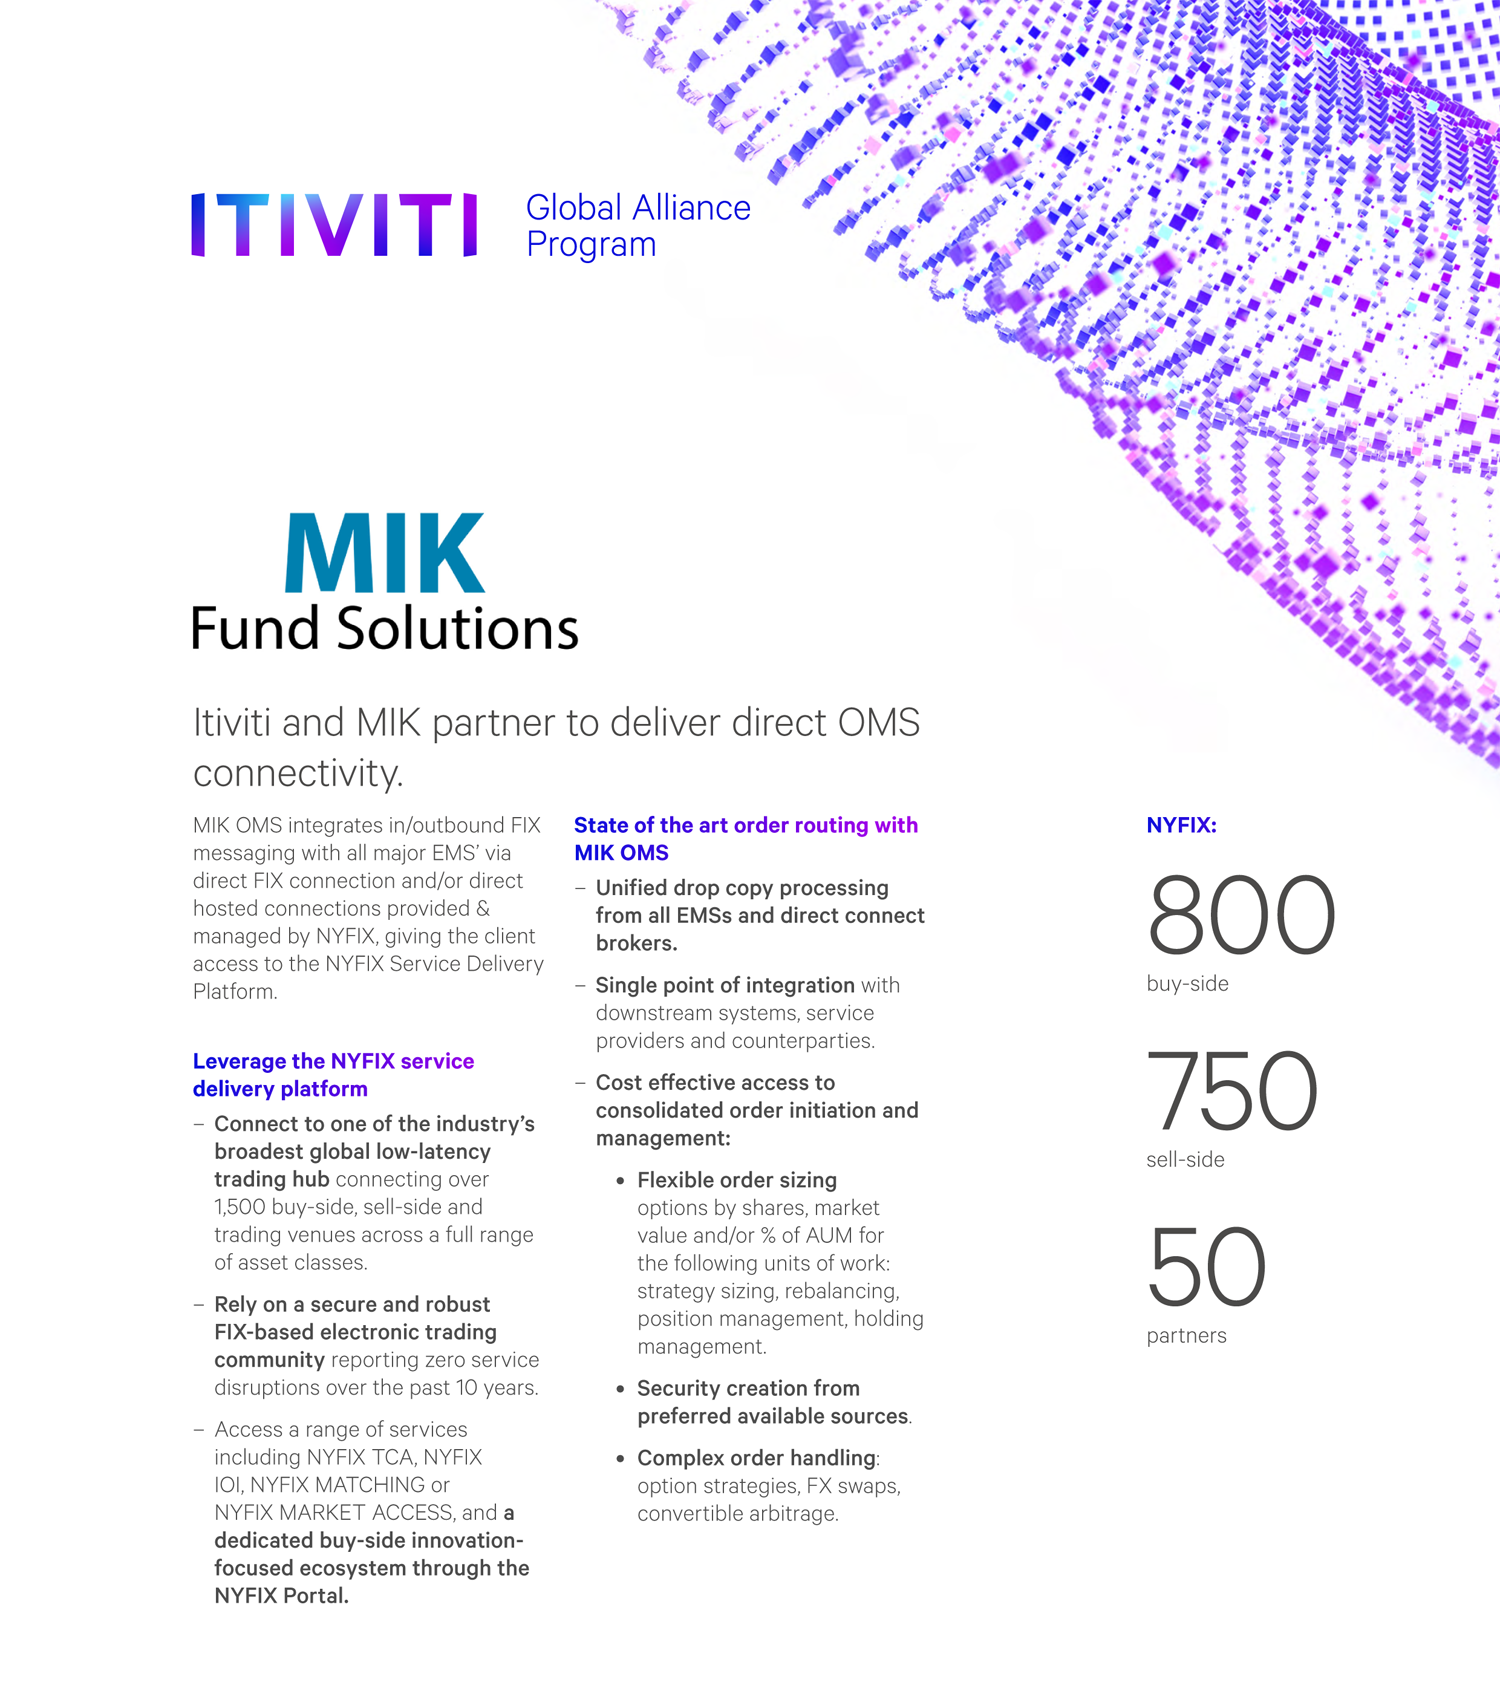 Itiviti and MIK partner to deliver direct OMS connectivity